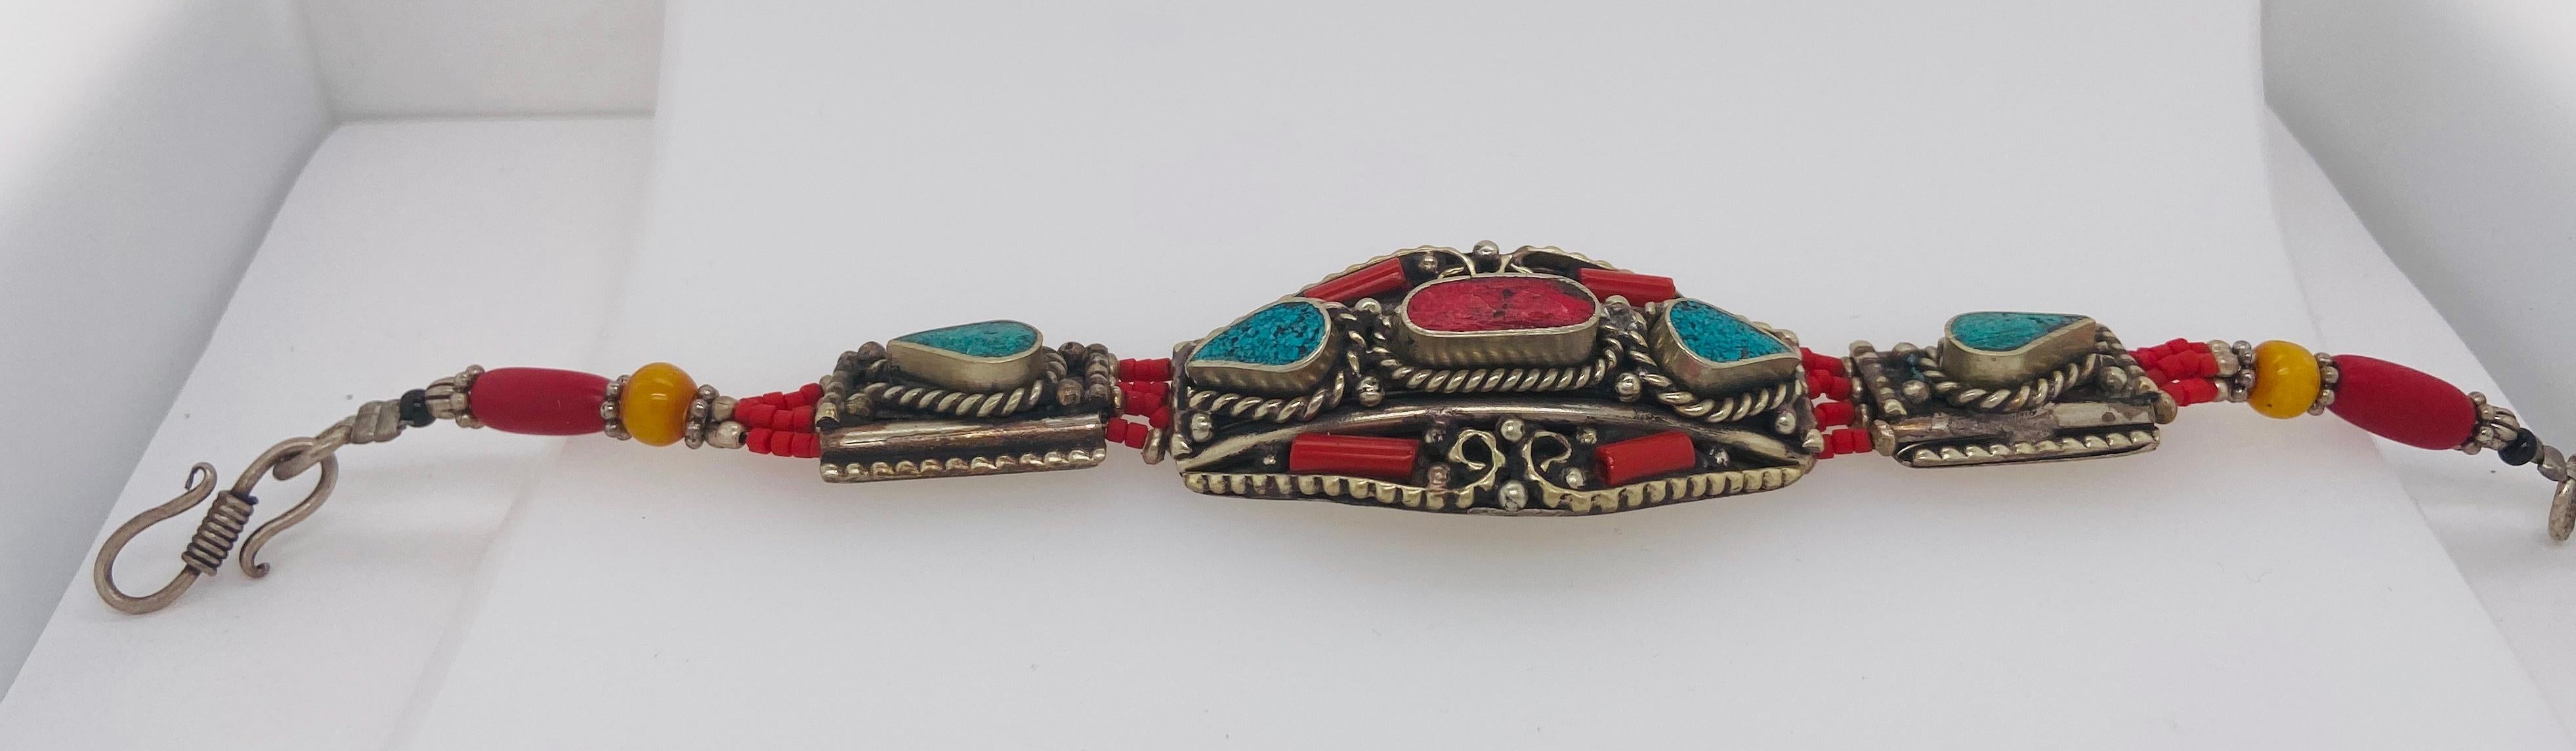 Midcentury Moroccan Tribal Silver Bracelet with Turquoise and Red Stones For Sale 7